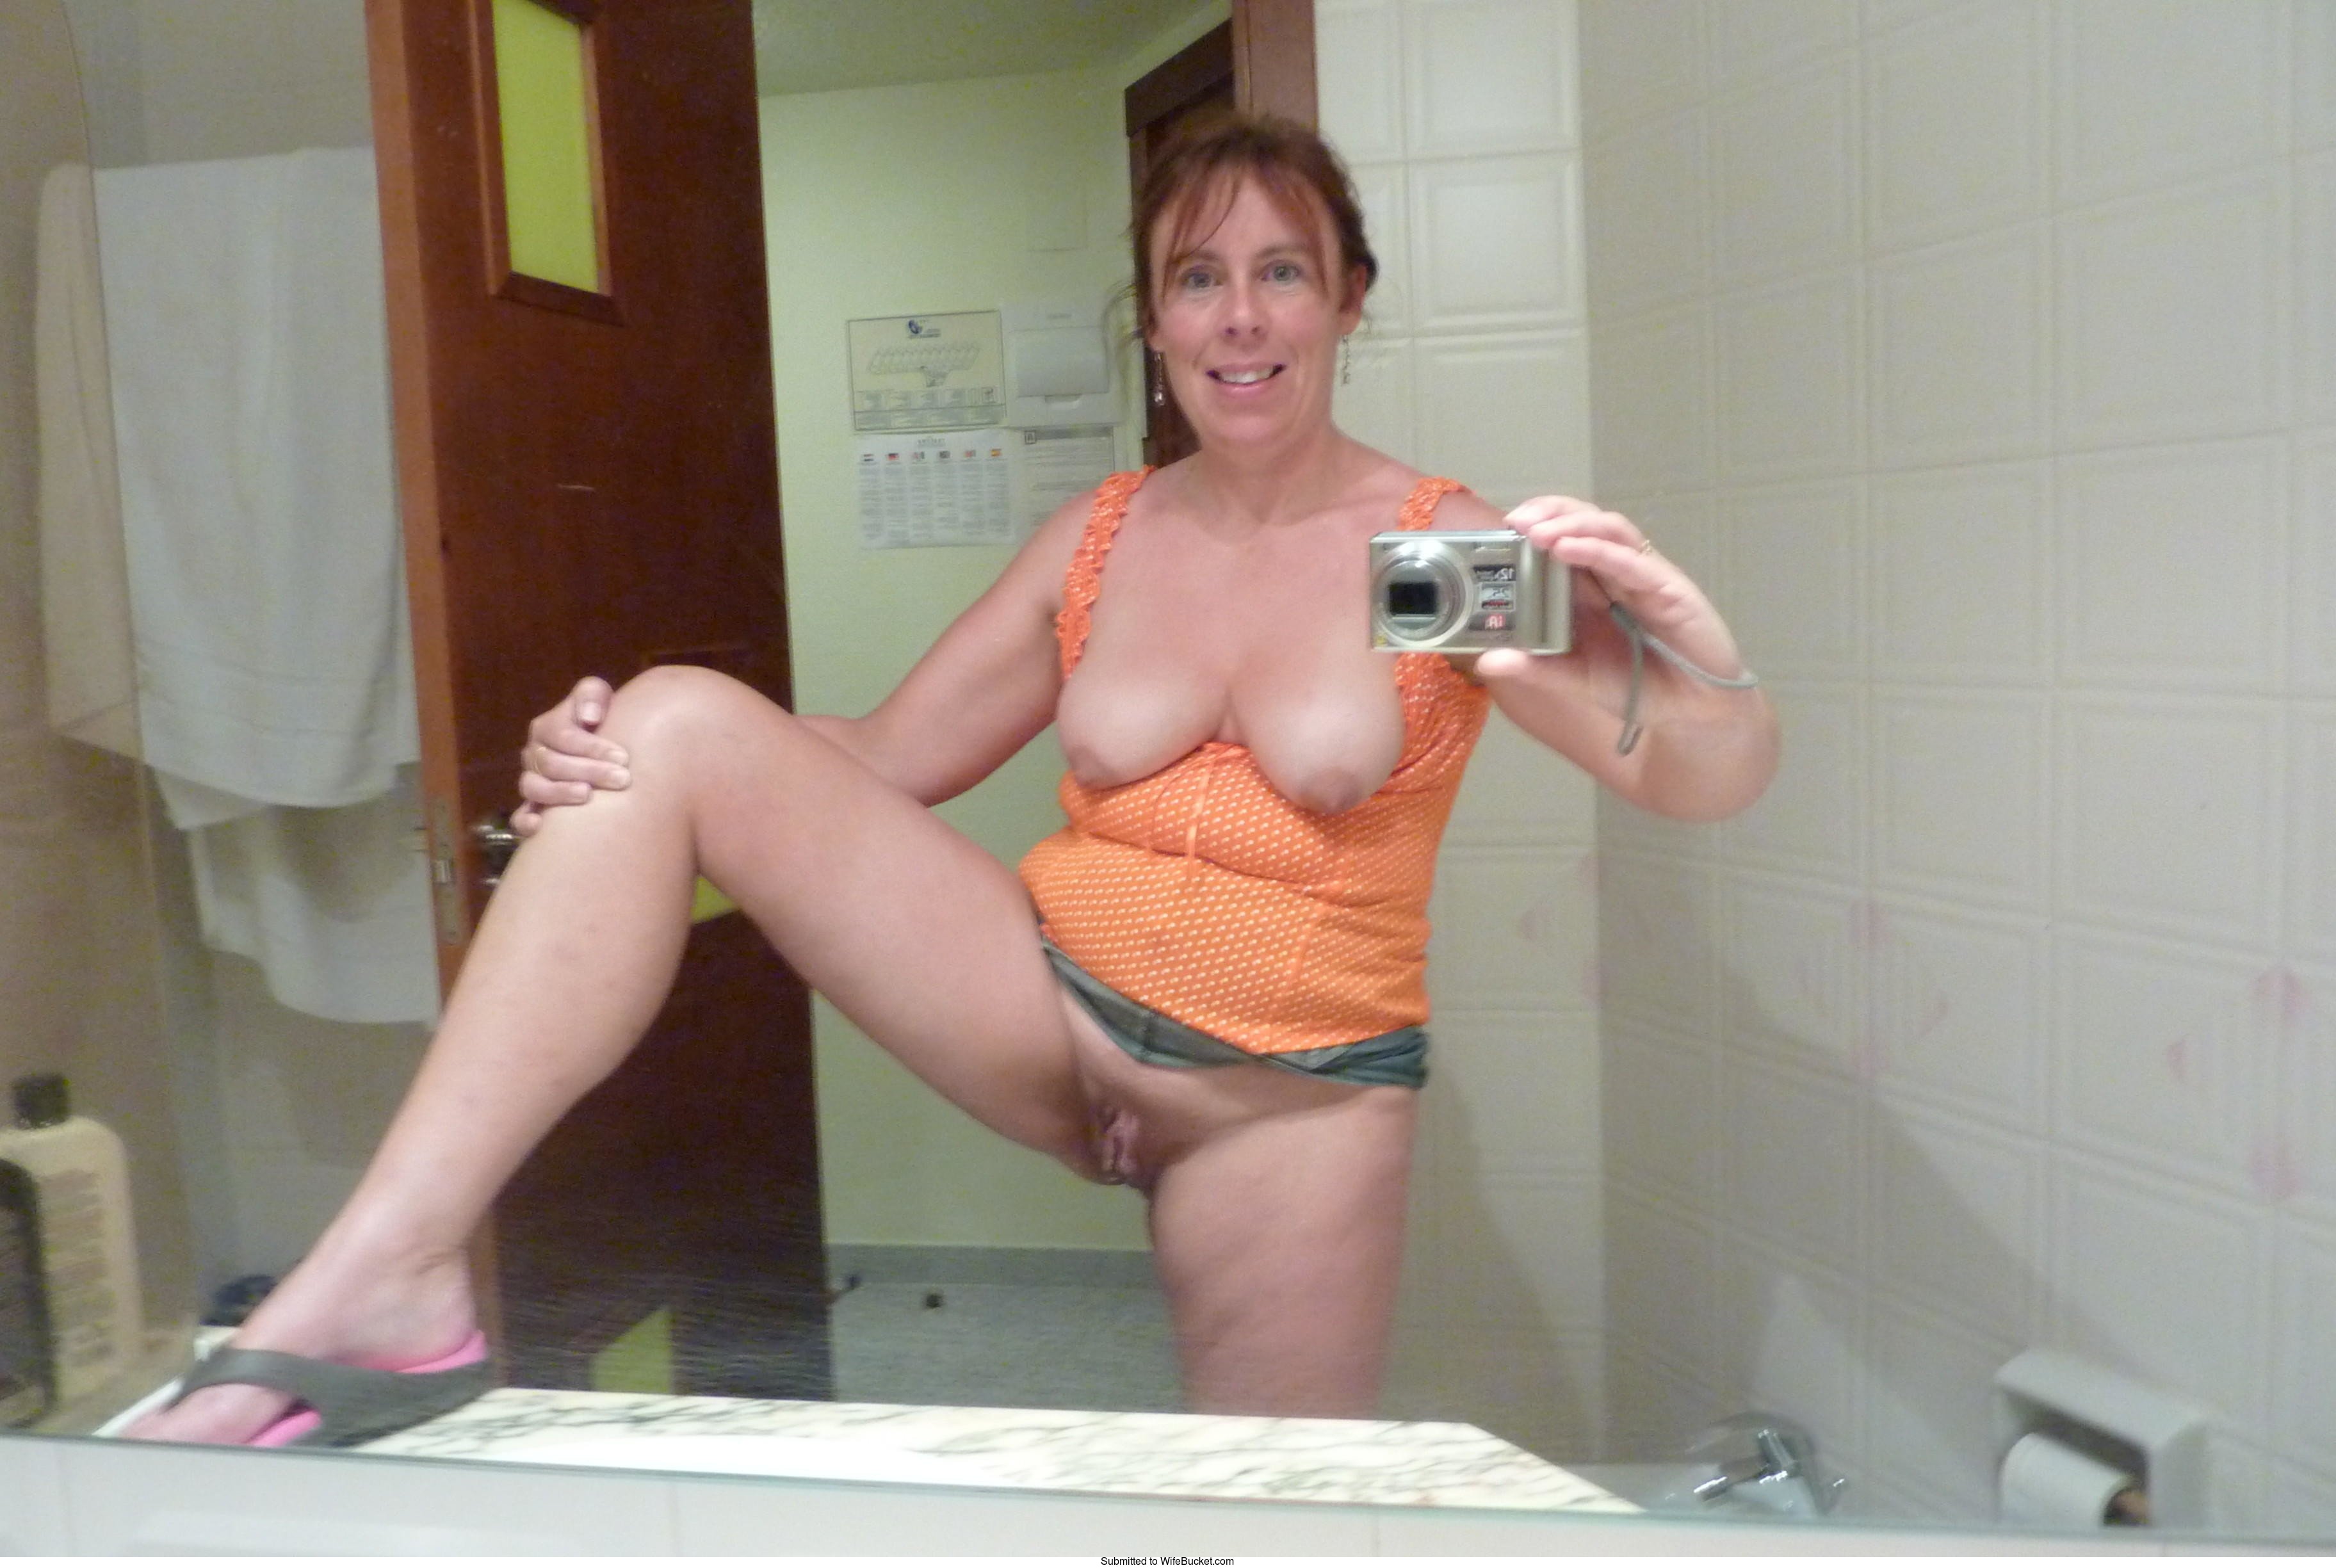 WifeBucket - More shameless nude selfies from average wives! 